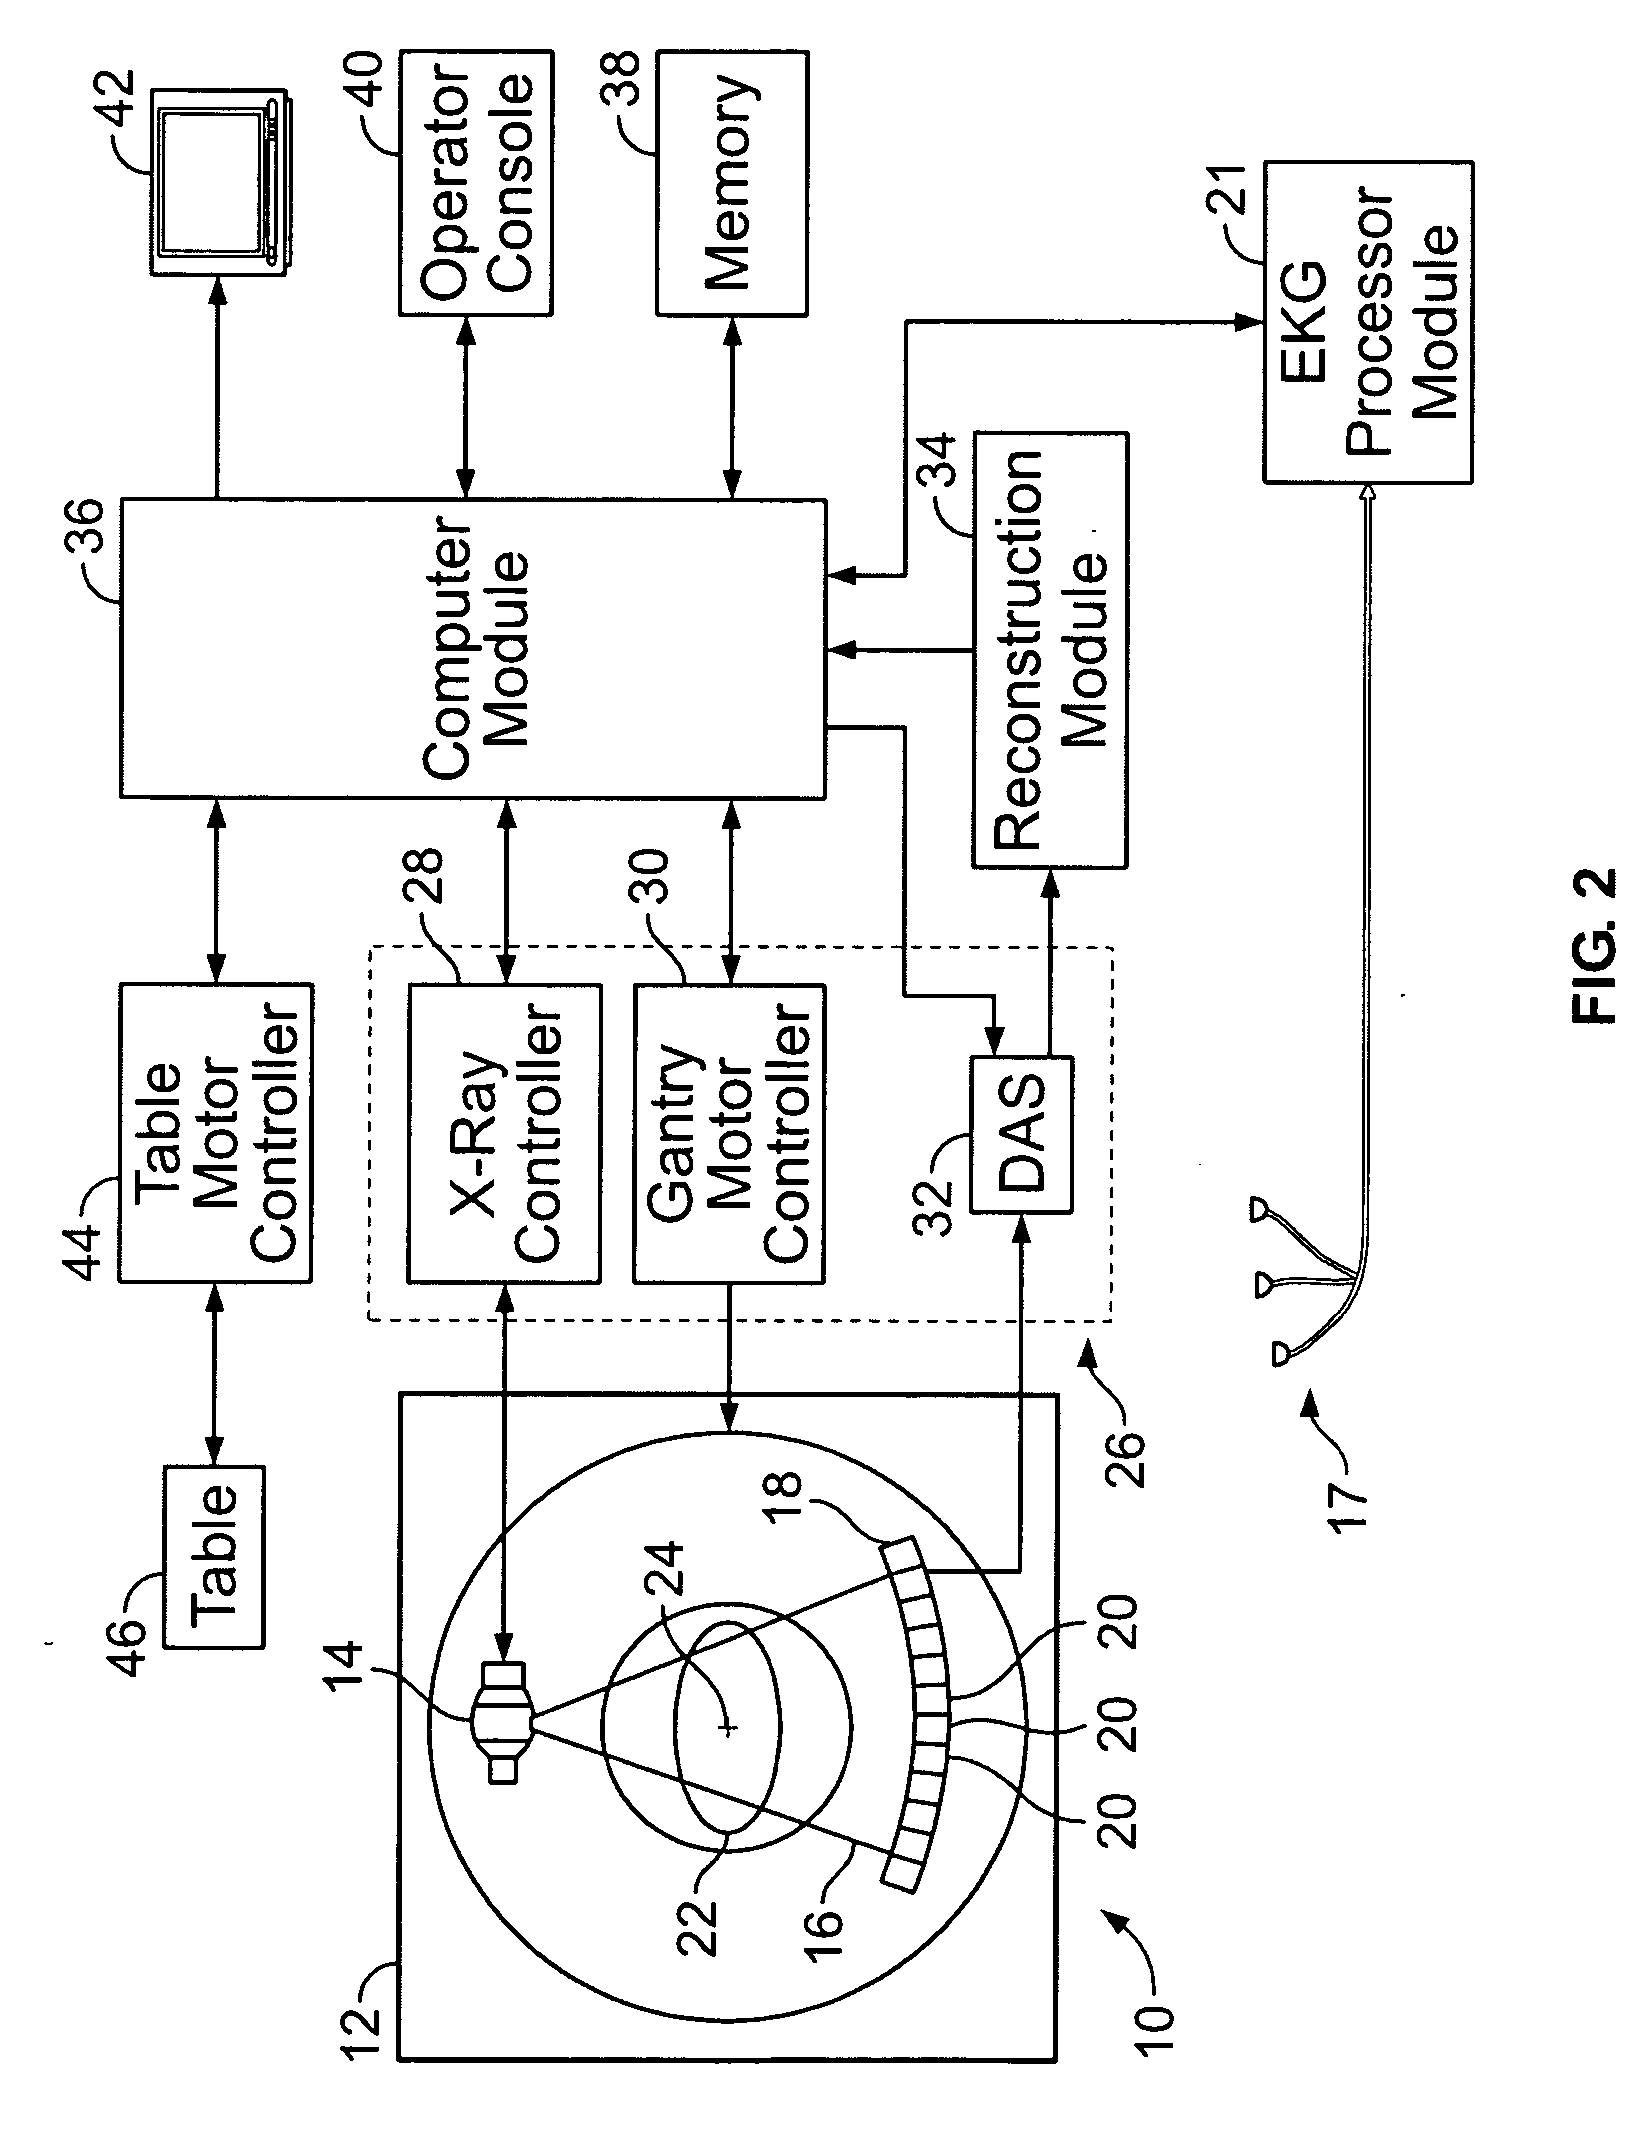 Method and system for performing CT image reconstruction with motion artifact correction